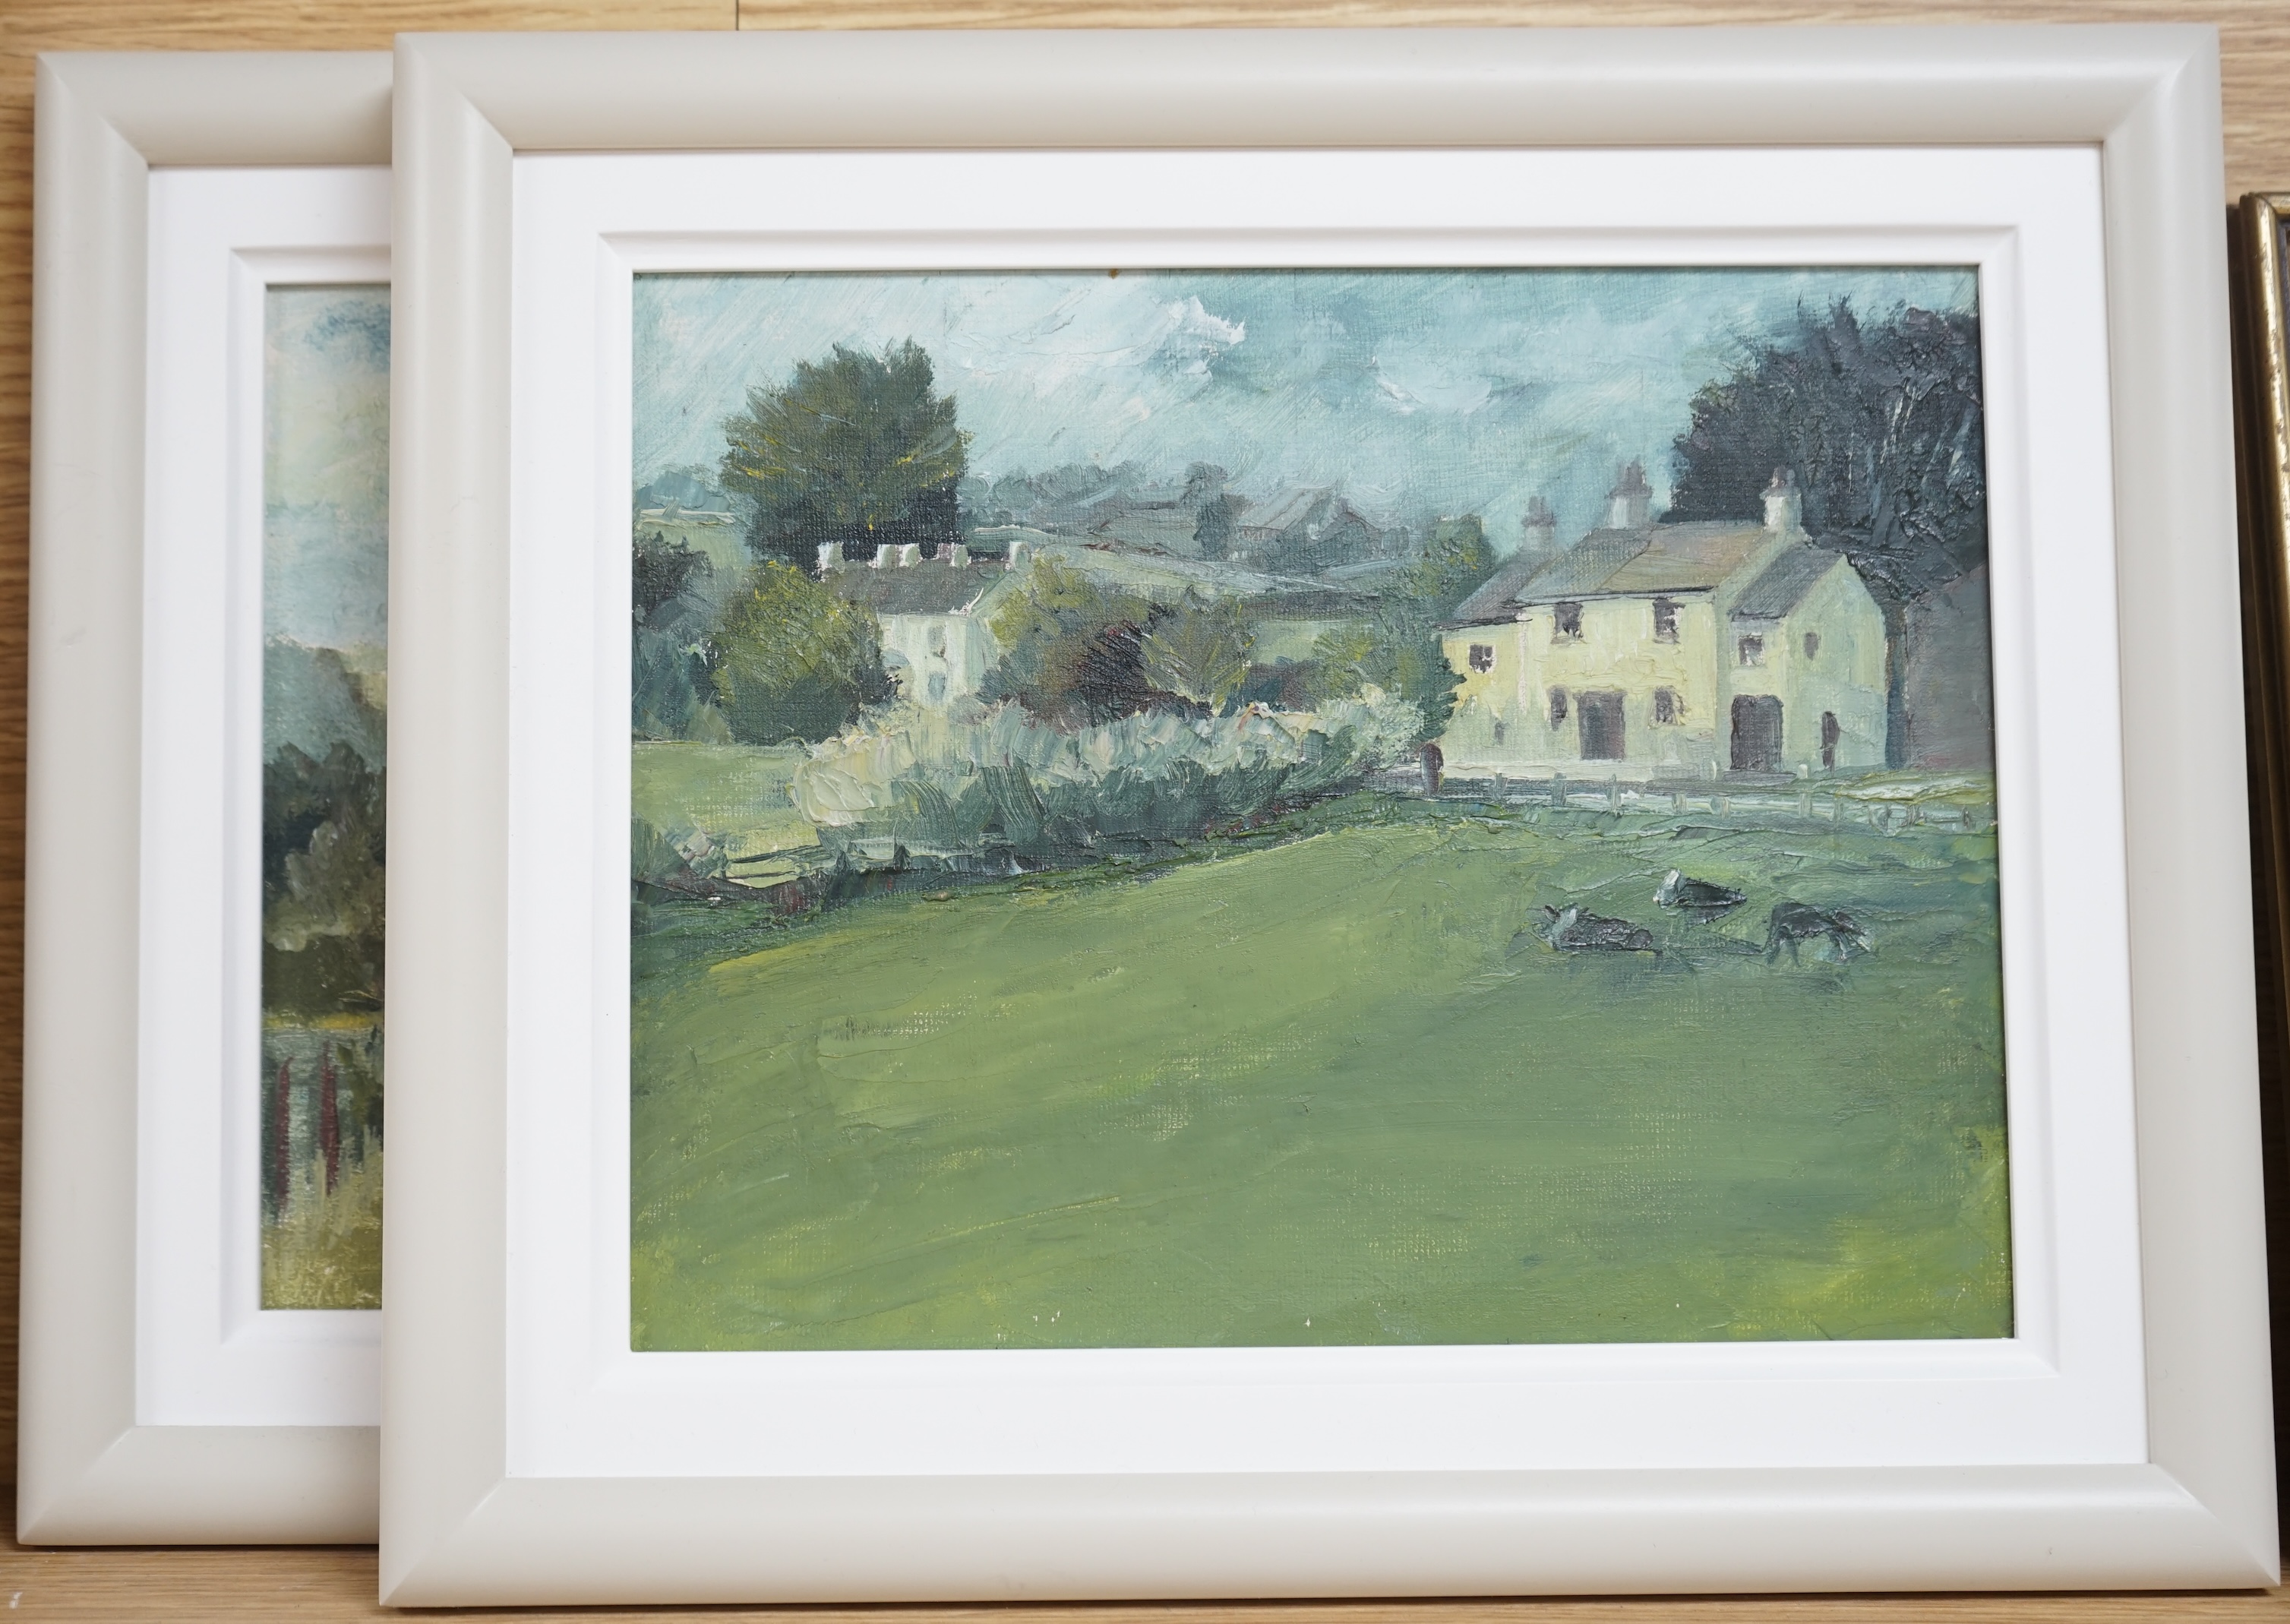 Nick Lelean, two oils on board, Studies of houses in Waverton, Wigton, Lake District, one signed, 19 x 24cm. Condition - good